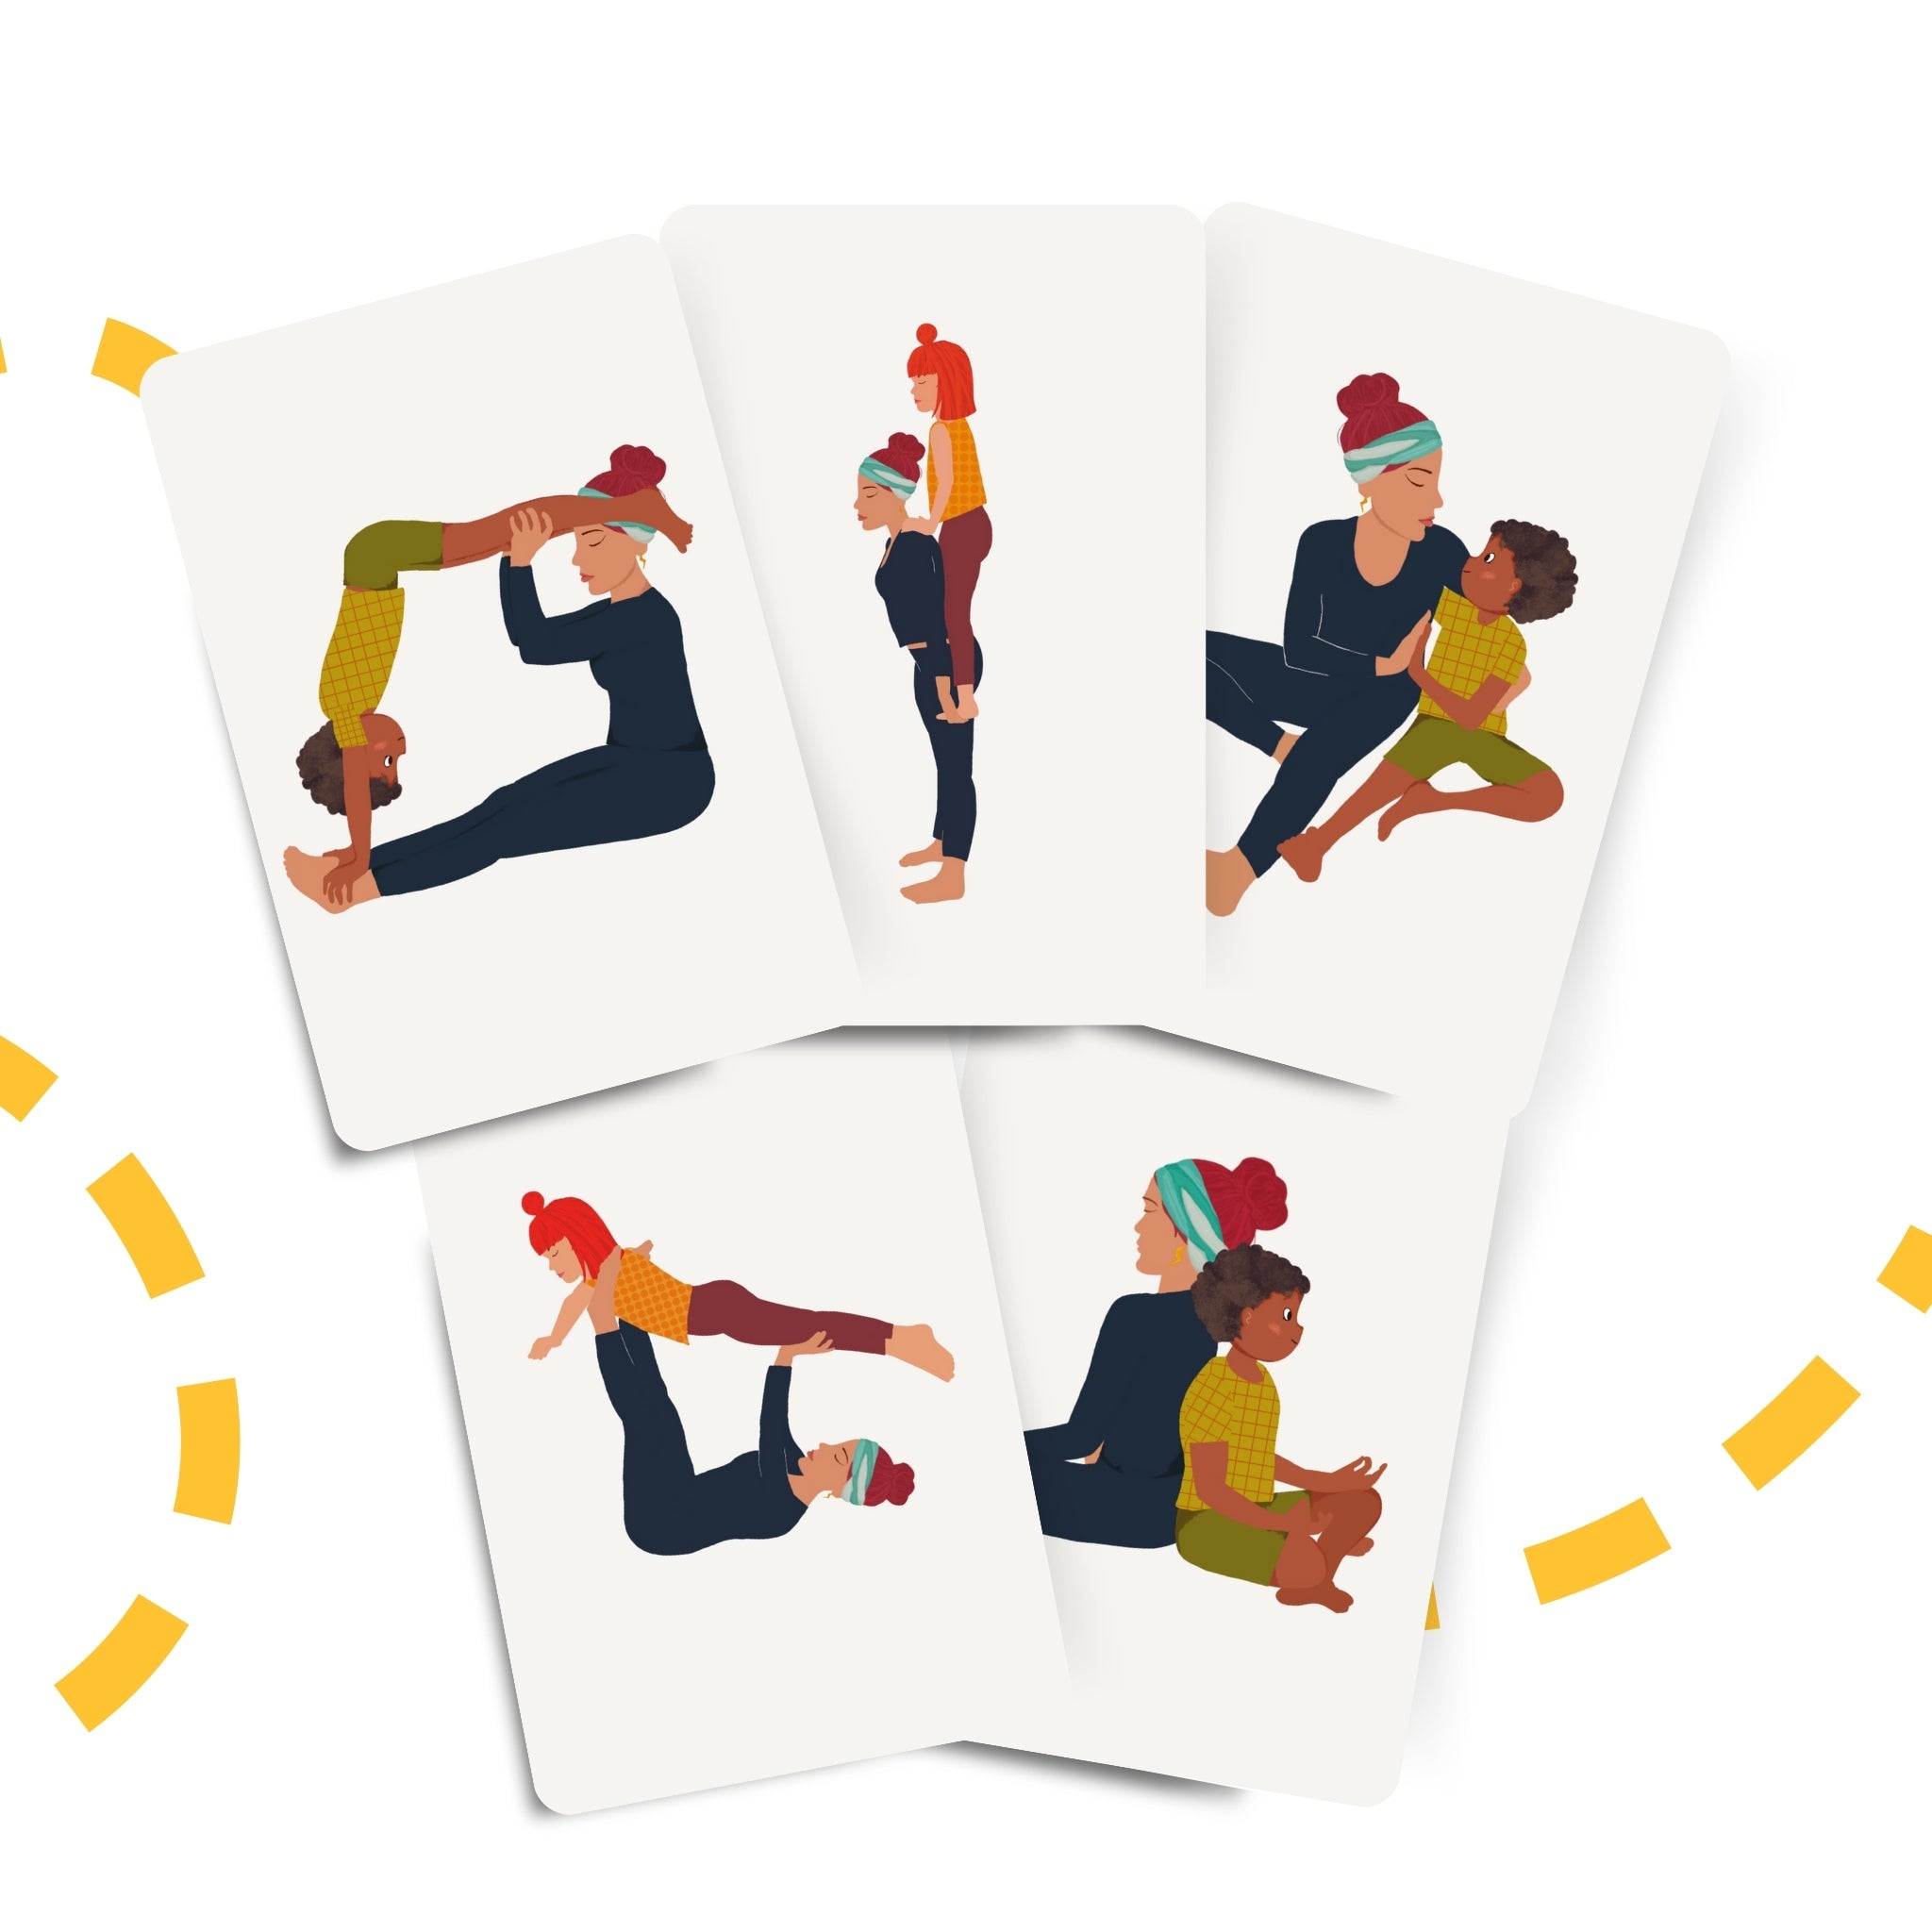 Family yoga card game - duo yoga adult & child